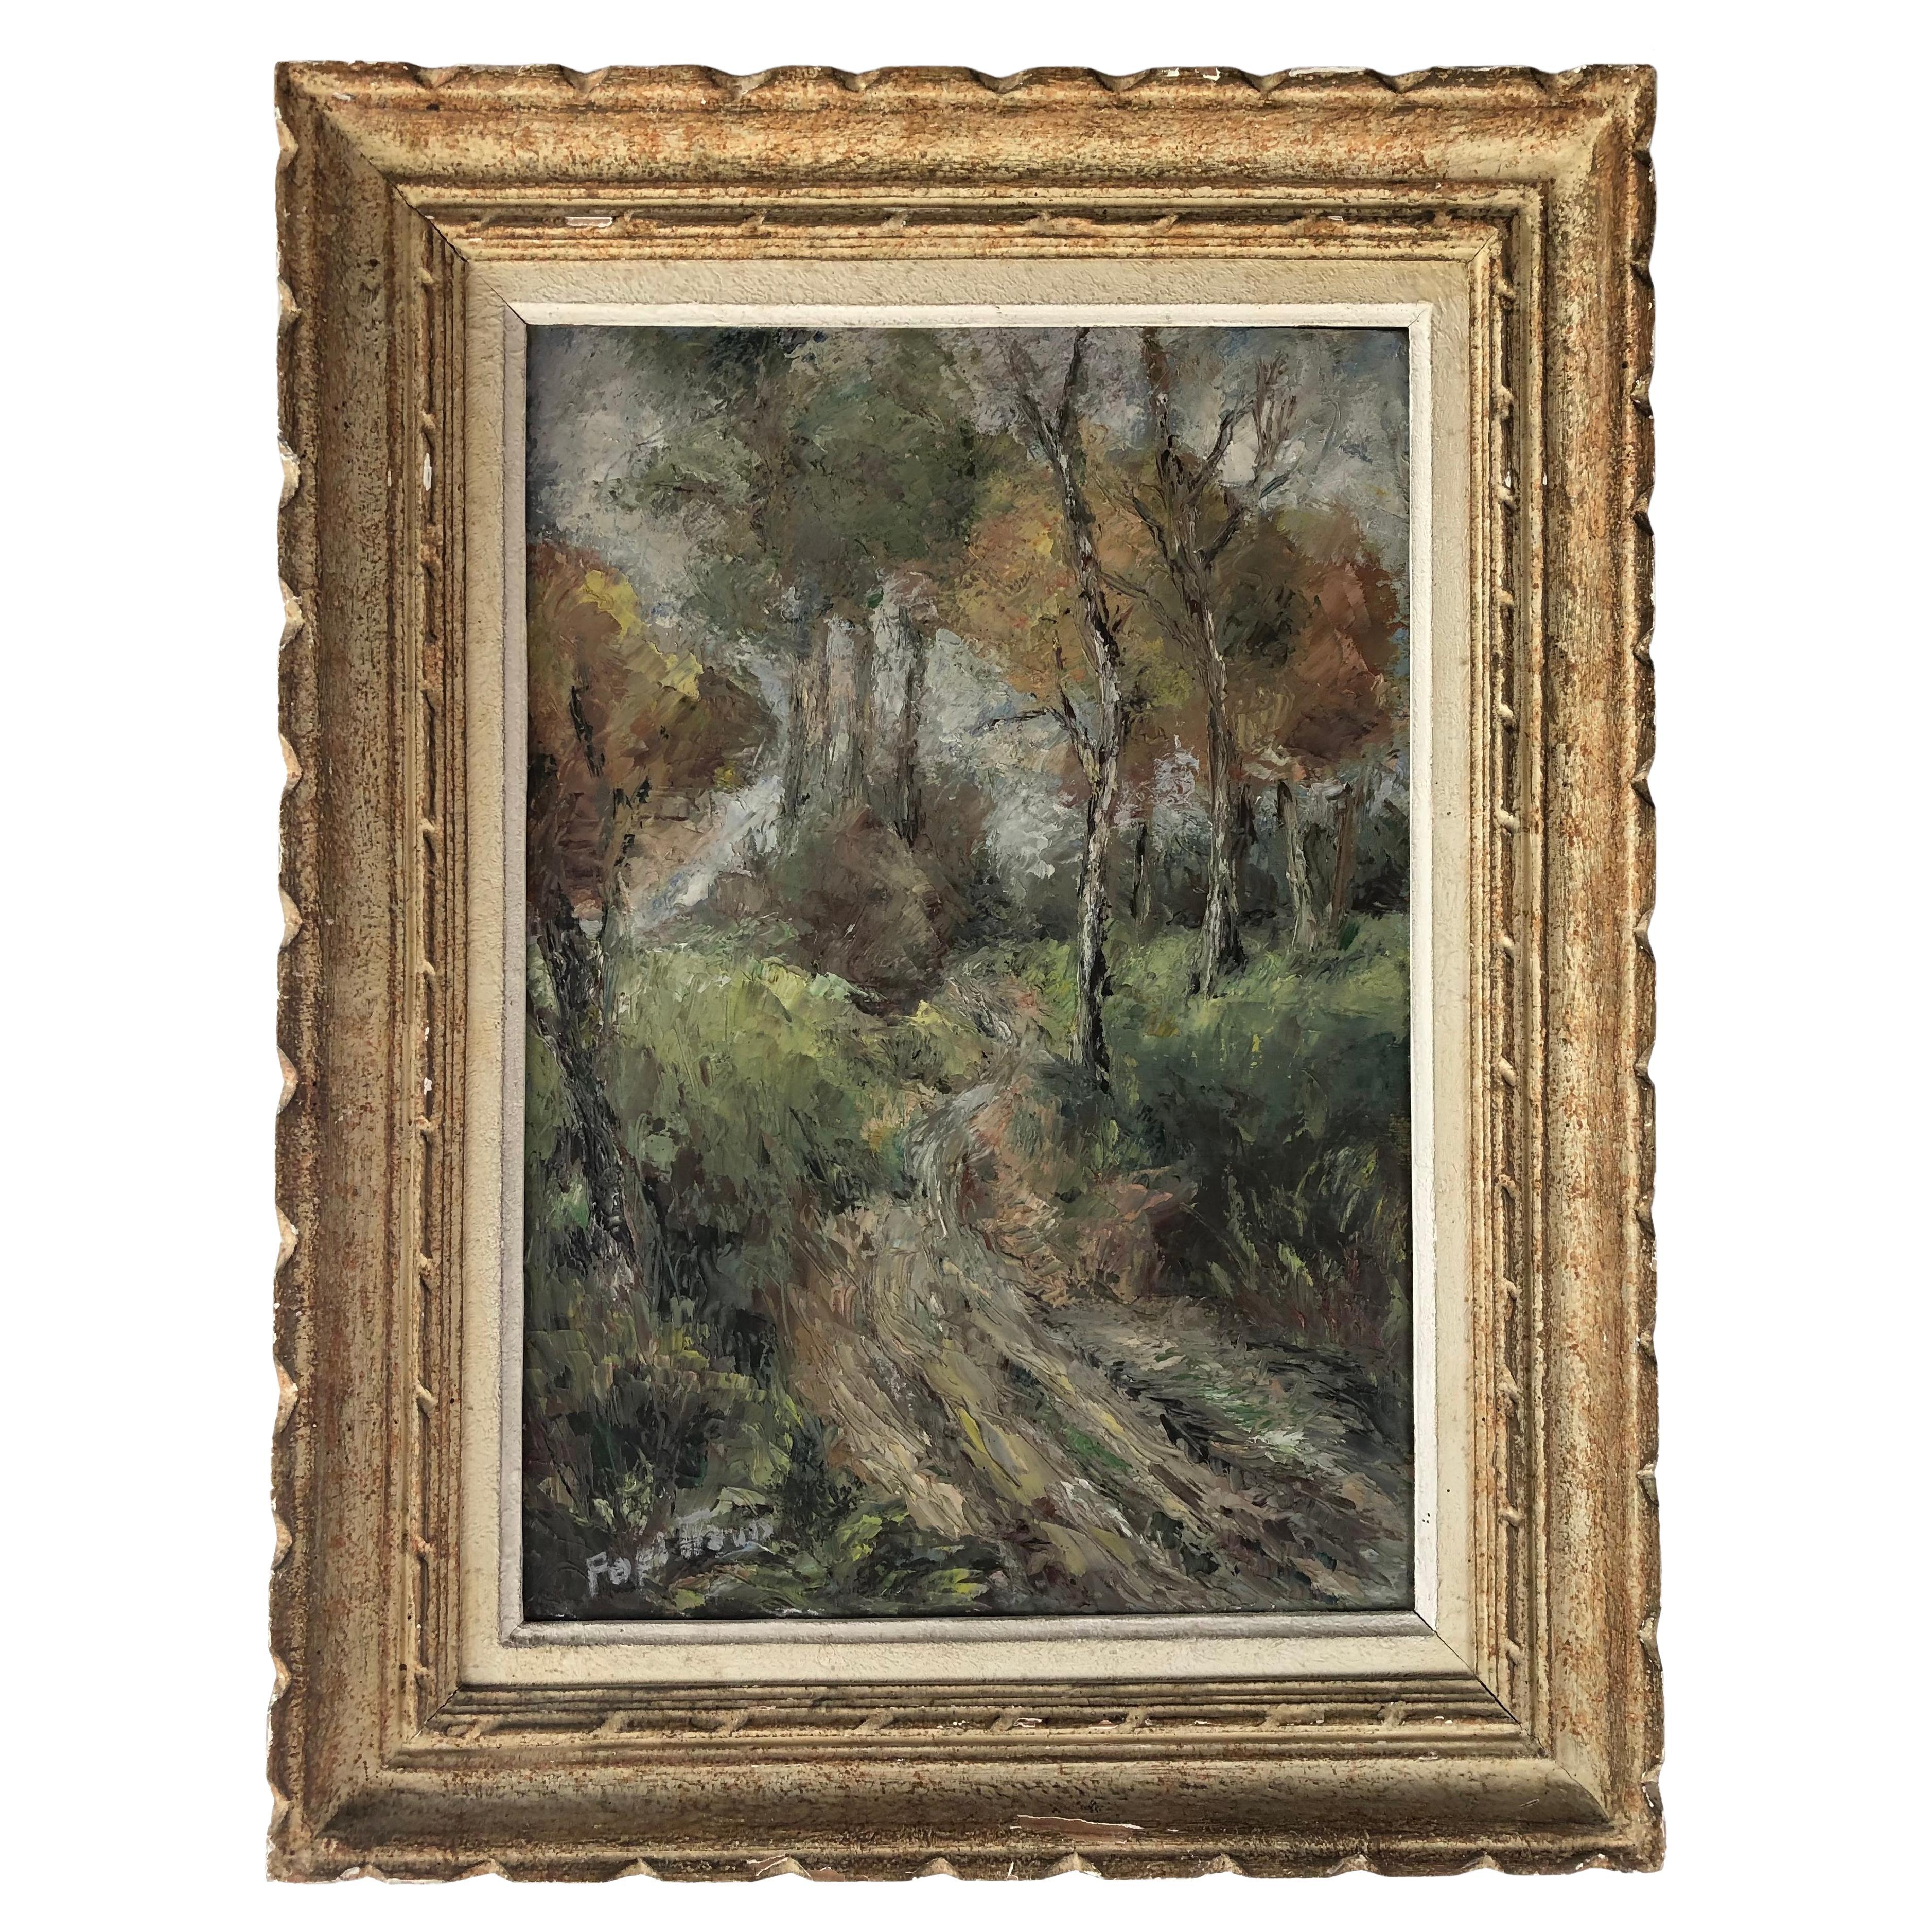 Original French Oil Painting of a Country Scene by Marcelle Papillaud